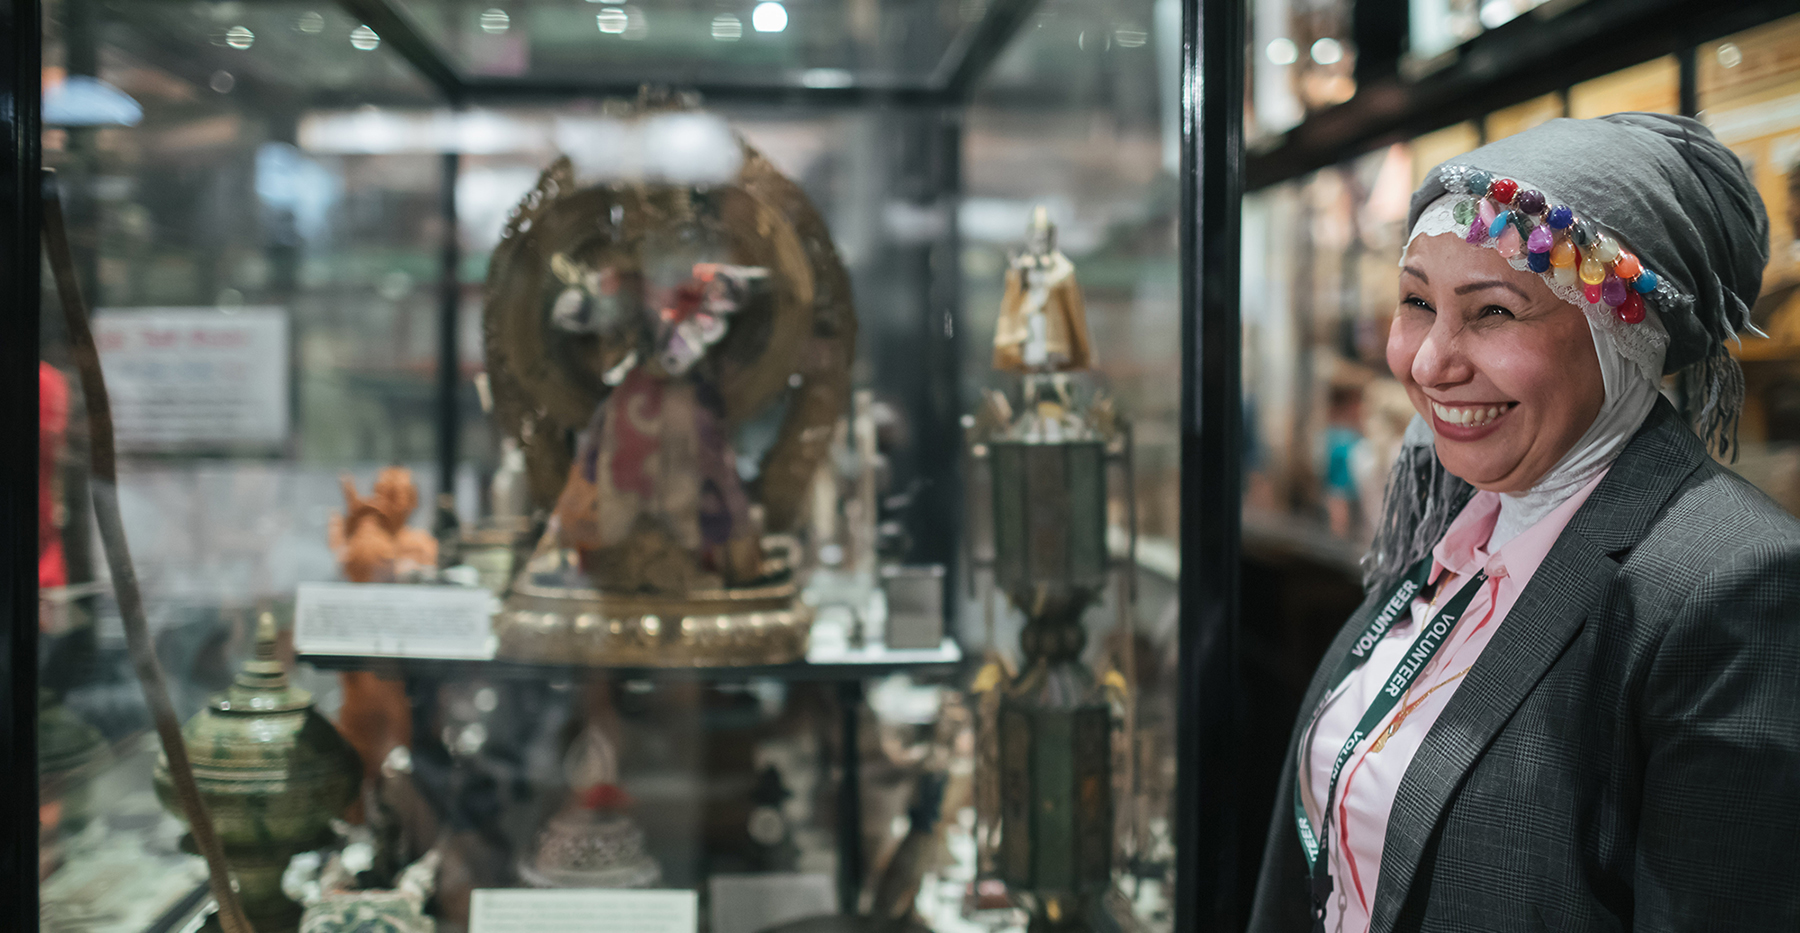 A woman smiles while pointing to an object in a glass display case 